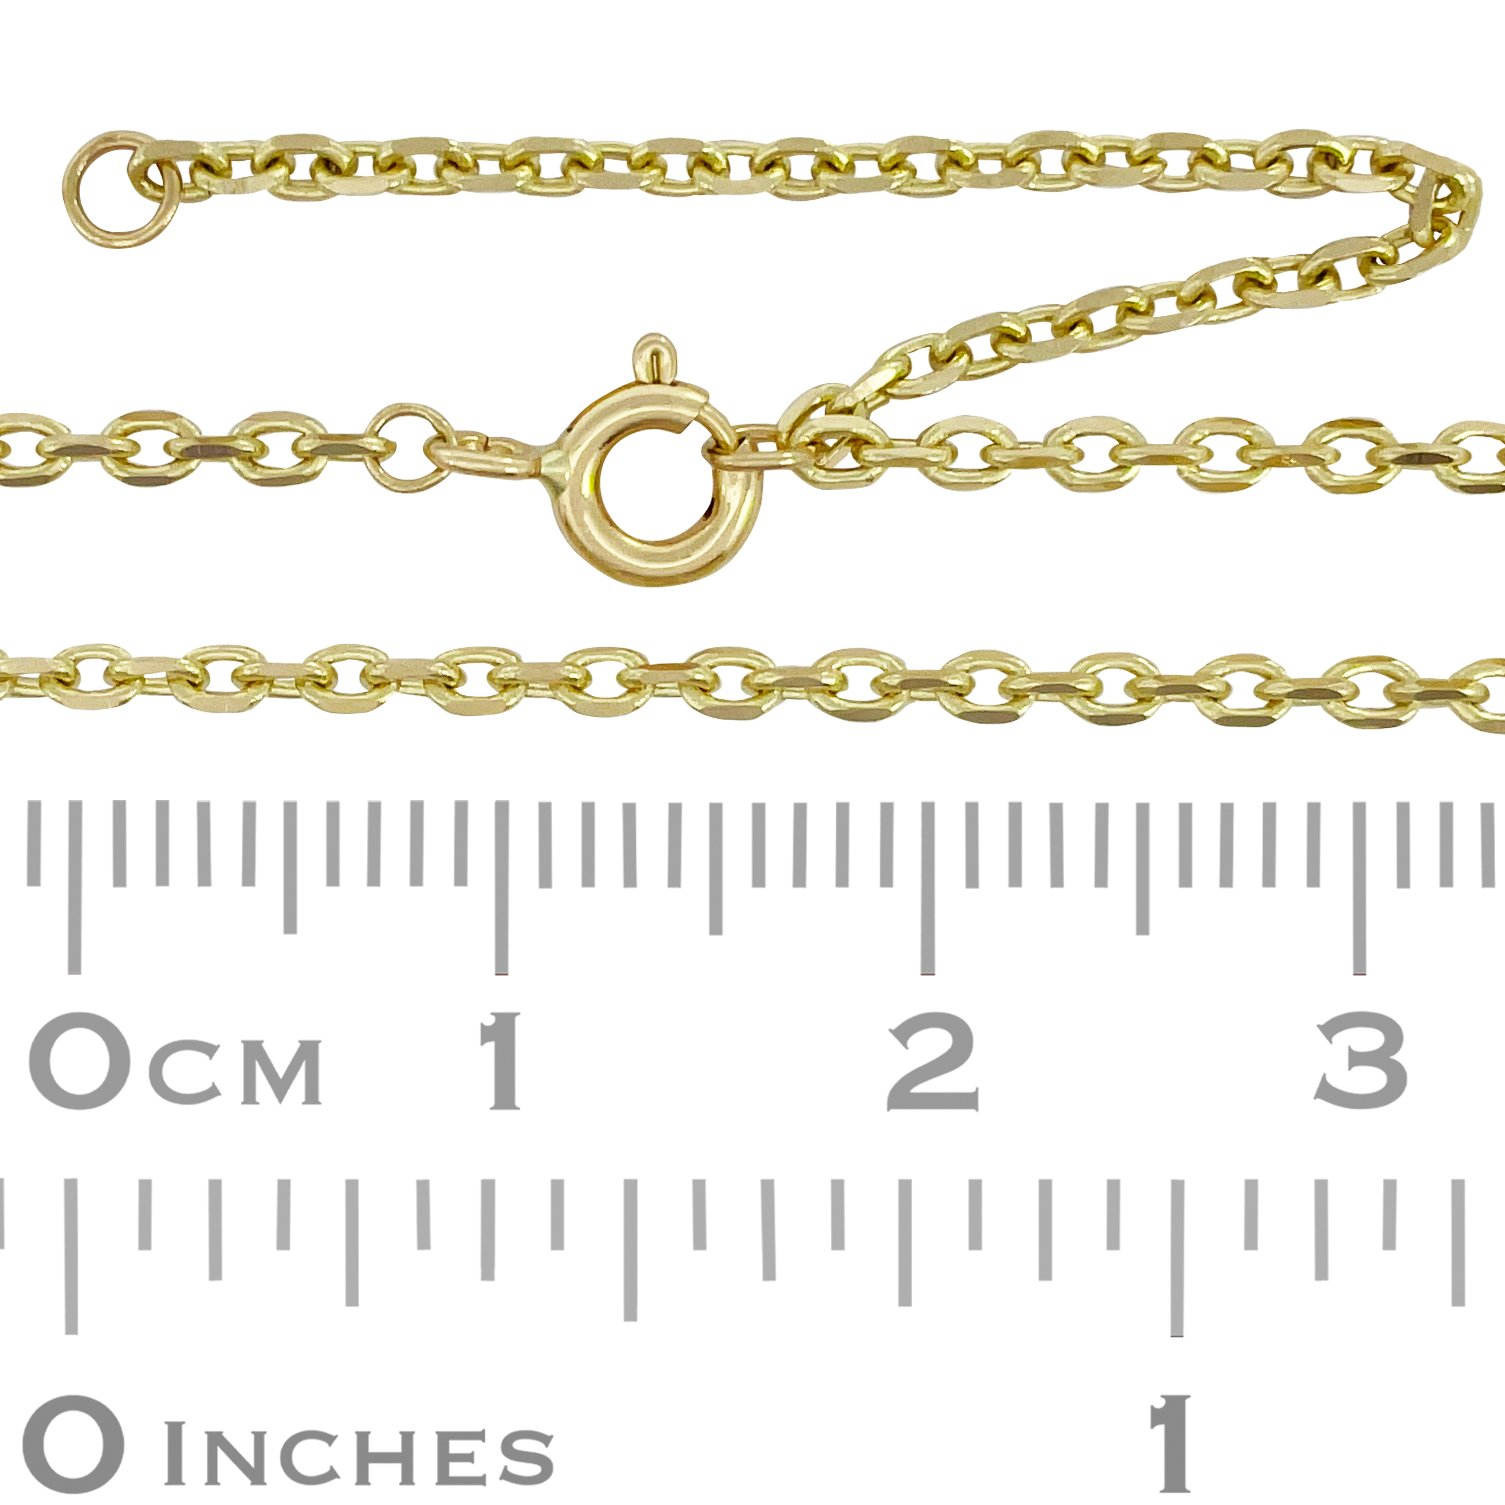 1.7mm 14K Yellow Gold Double Diamond Cut Drawn Cable Chain, 16 Inches With 2 Inch Extension Ready To Wear With Spring Ring Clasp